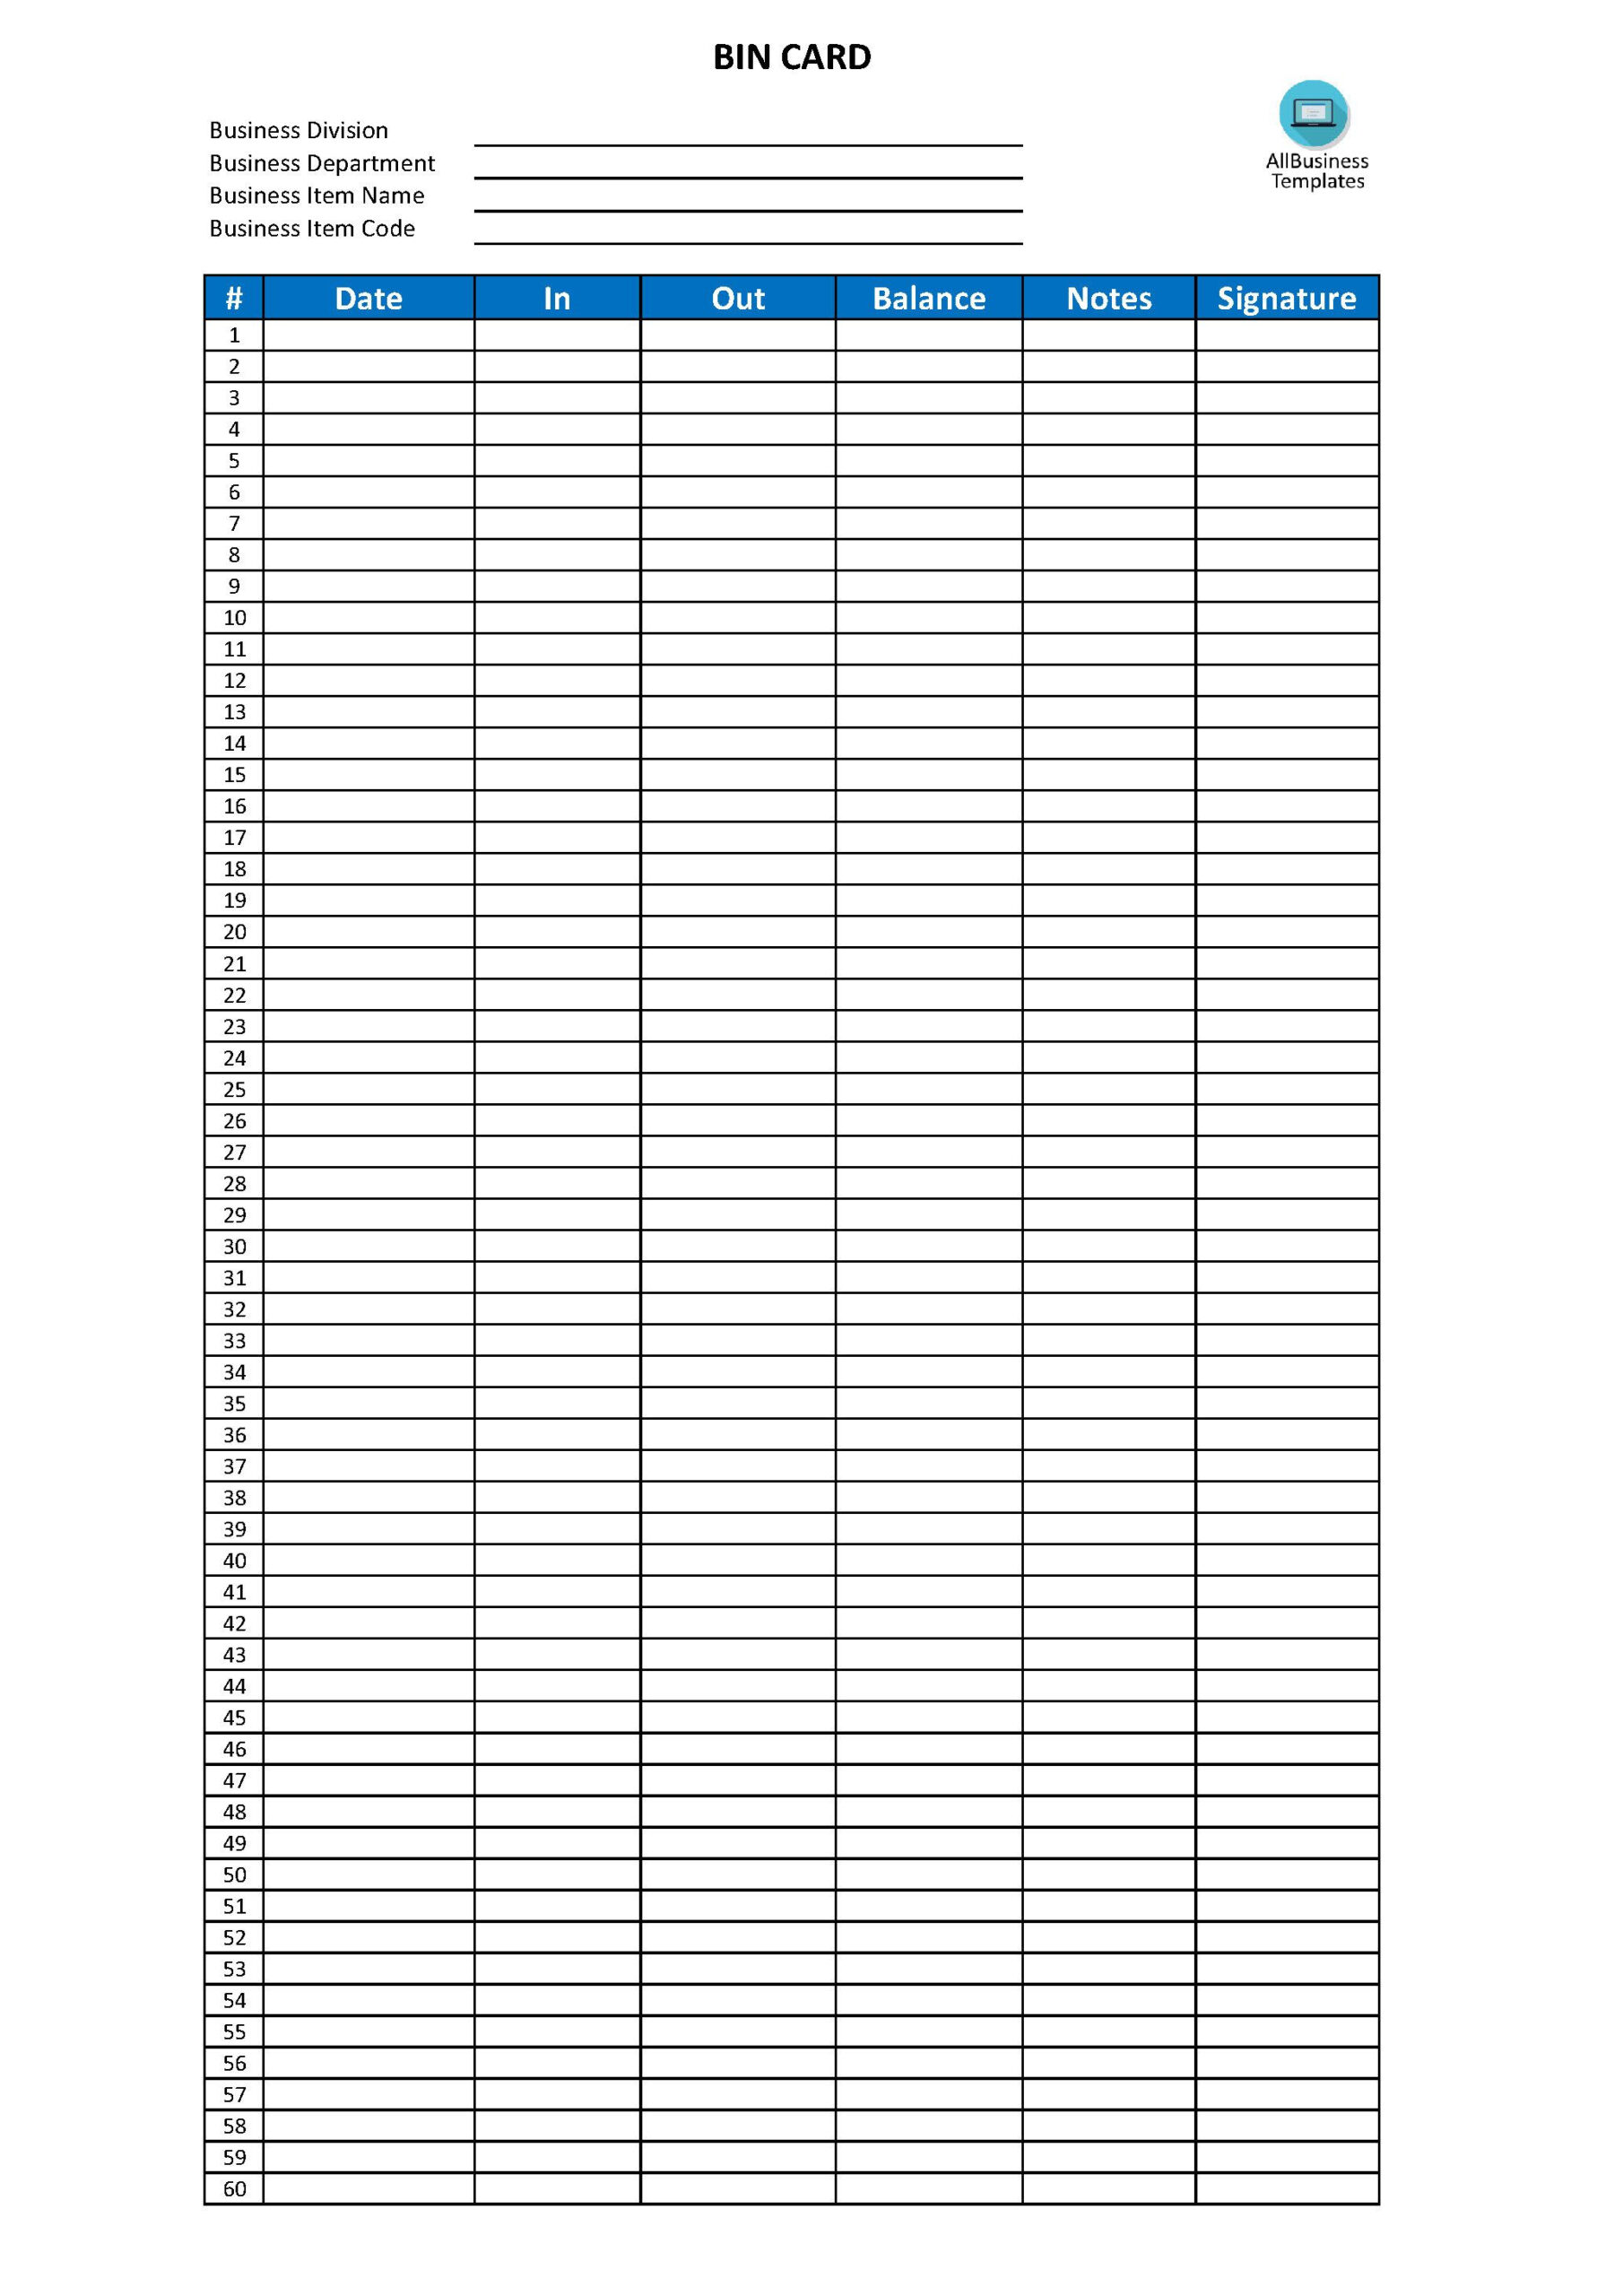 Bin Card Format Excel - Are You Managing A Store And Like To For Bin Card Template